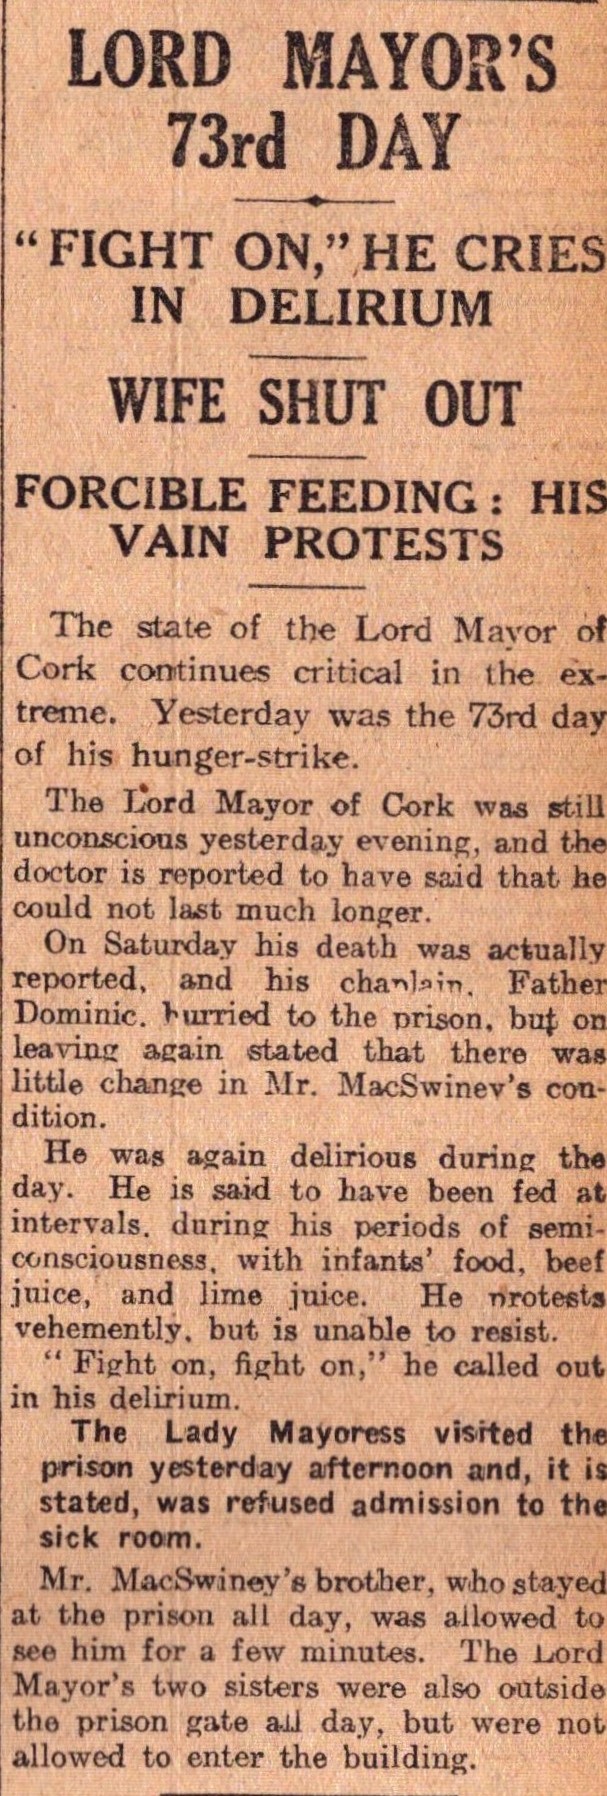 Irish War of Independence News Reports Black & Tans, Hunger Strikes 1920-10. - Image 3 of 3